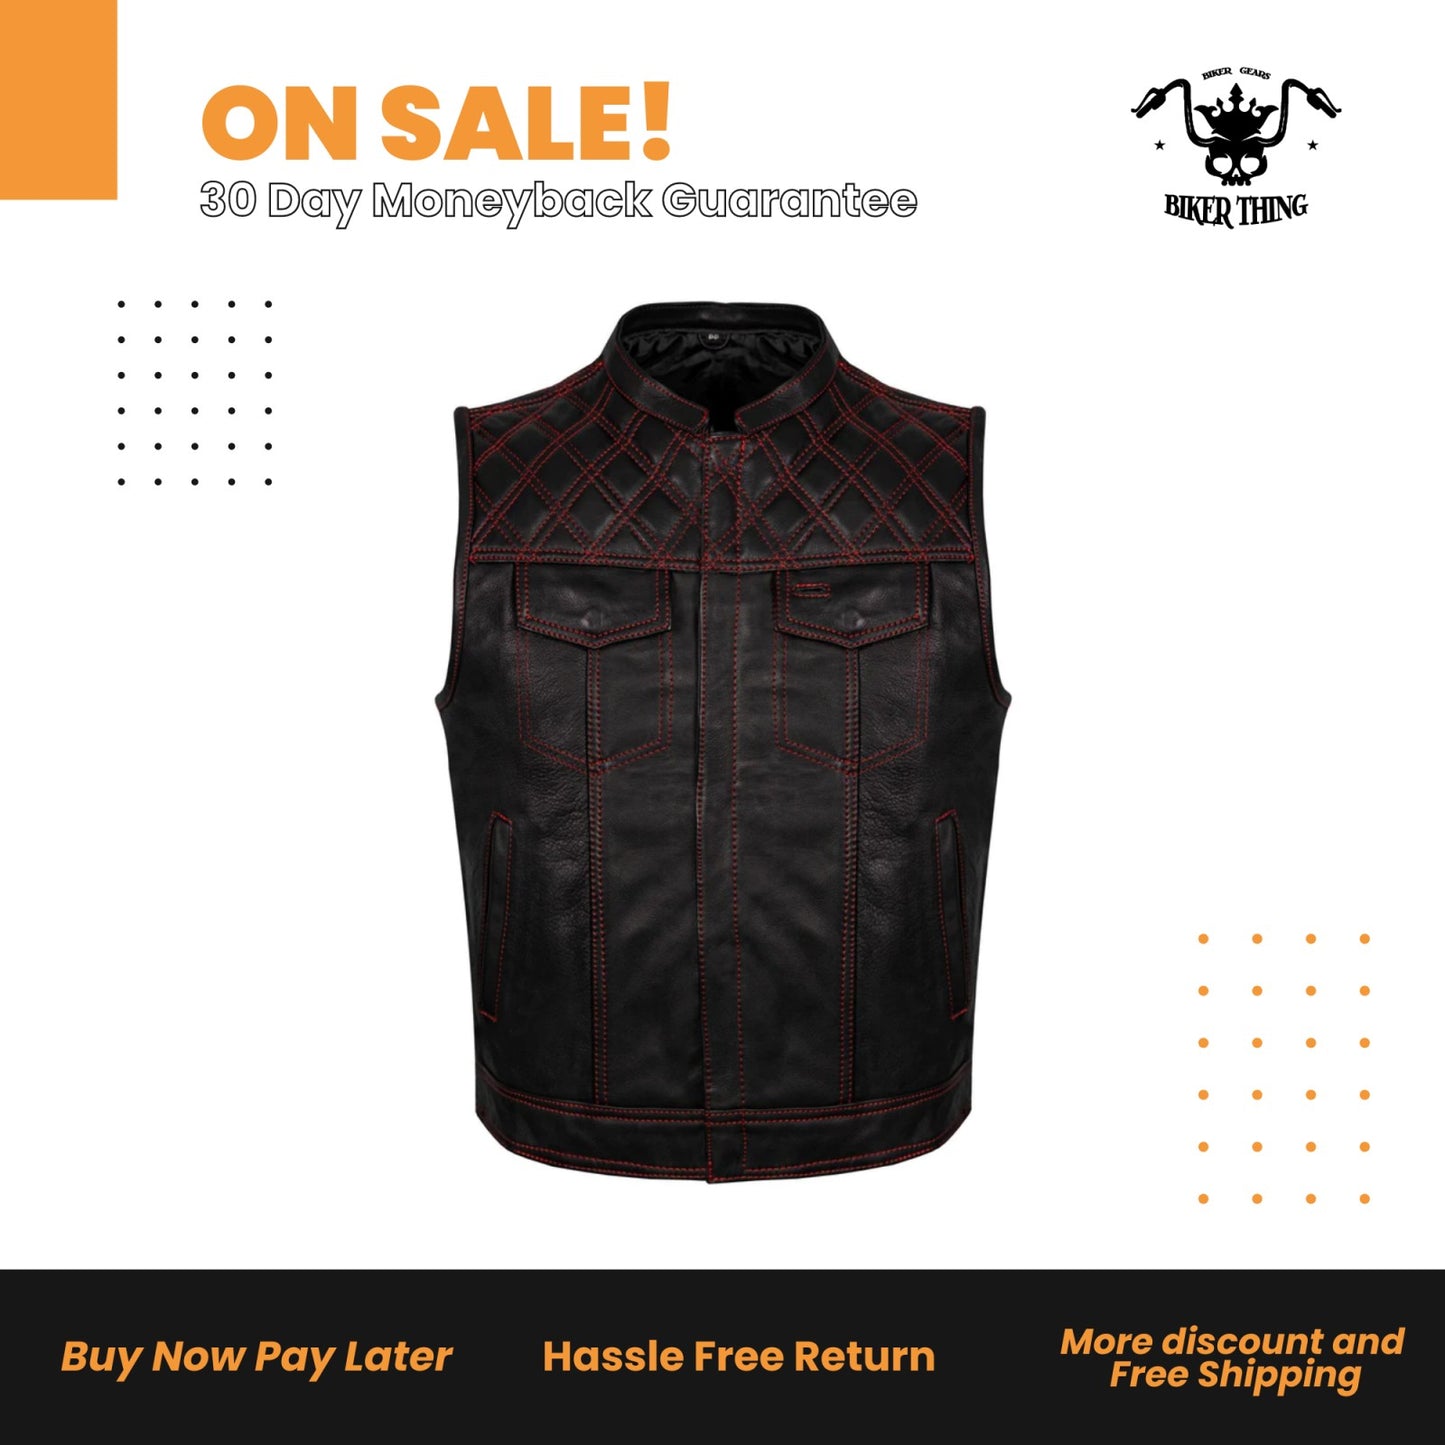 Mens Premium Naked Leather Motorcycle Club Vest Red Thread Zipper Front, Diamond Padding